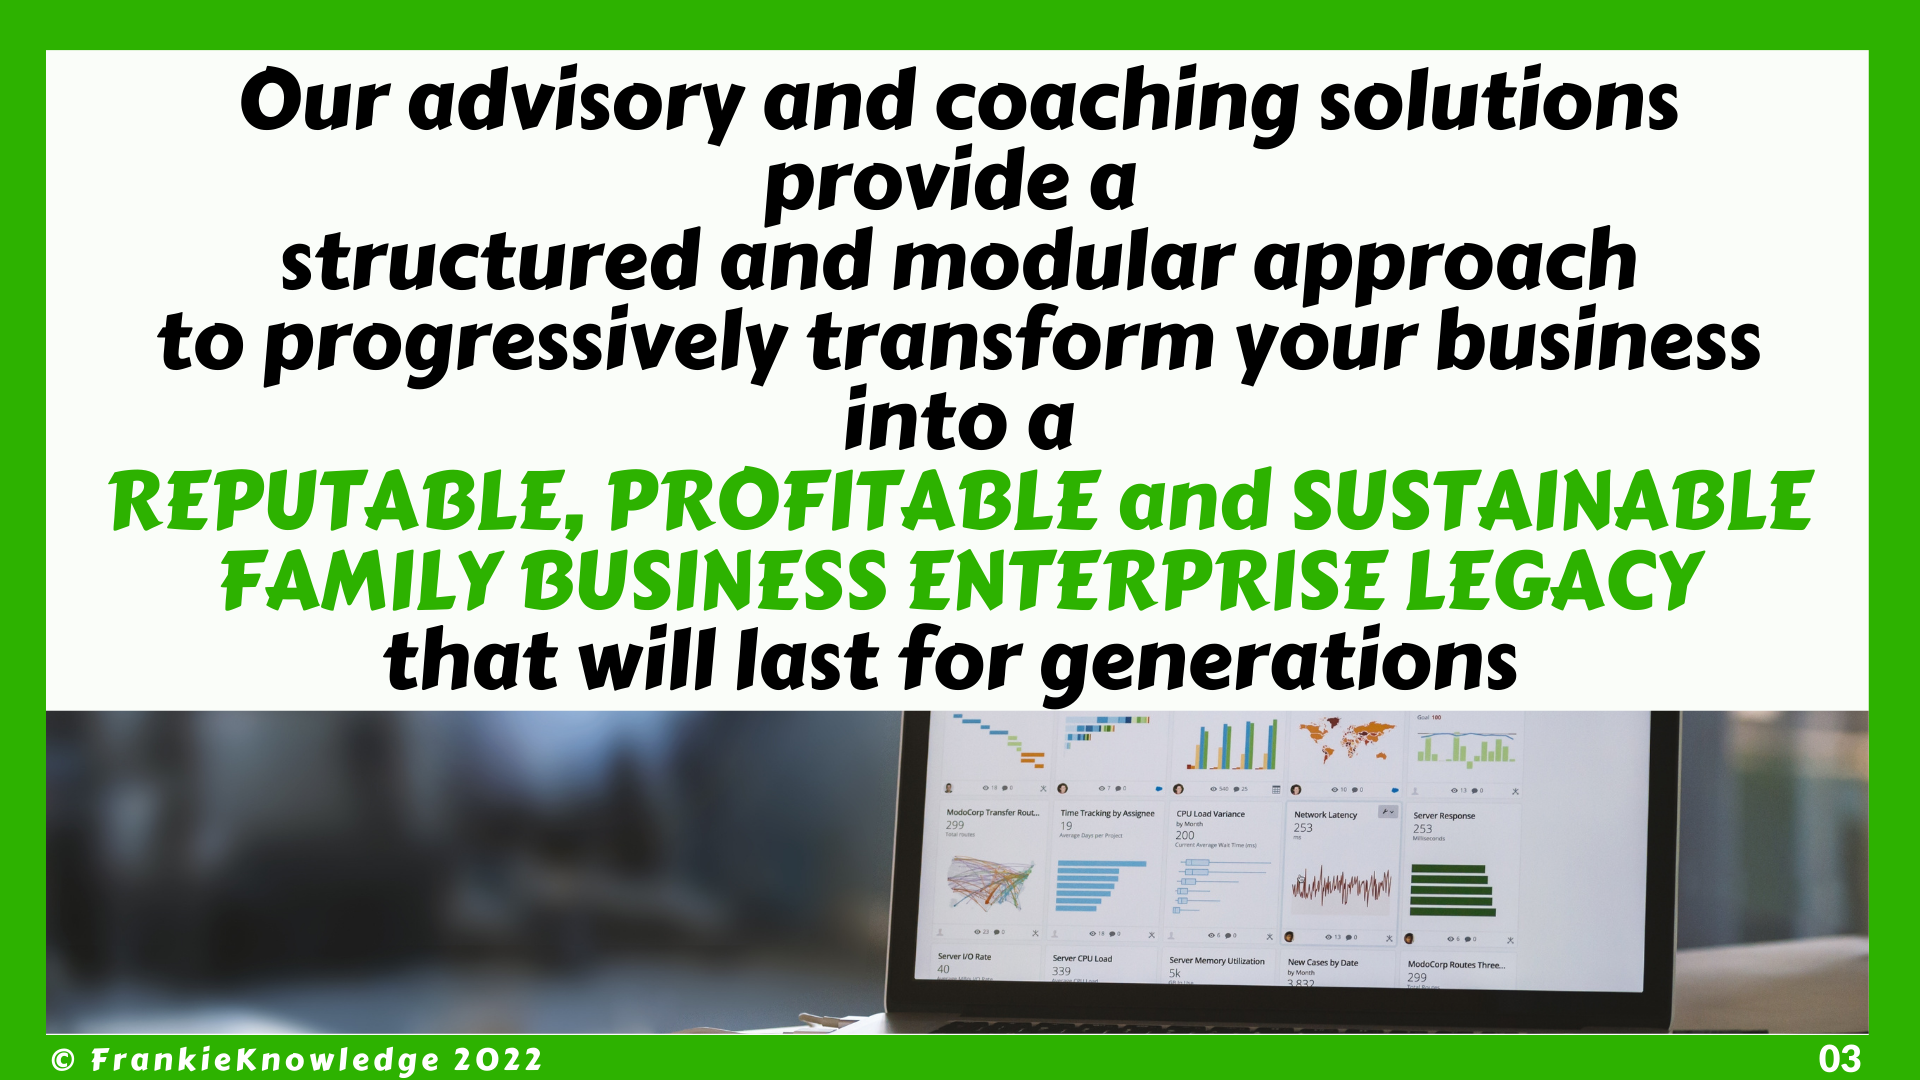 FrankieKnowledge's advisory and coaching solutions transform your business into a REPUTABLE, PROFITABLE and SUSTAINABLE FAMILY BUSINESS E